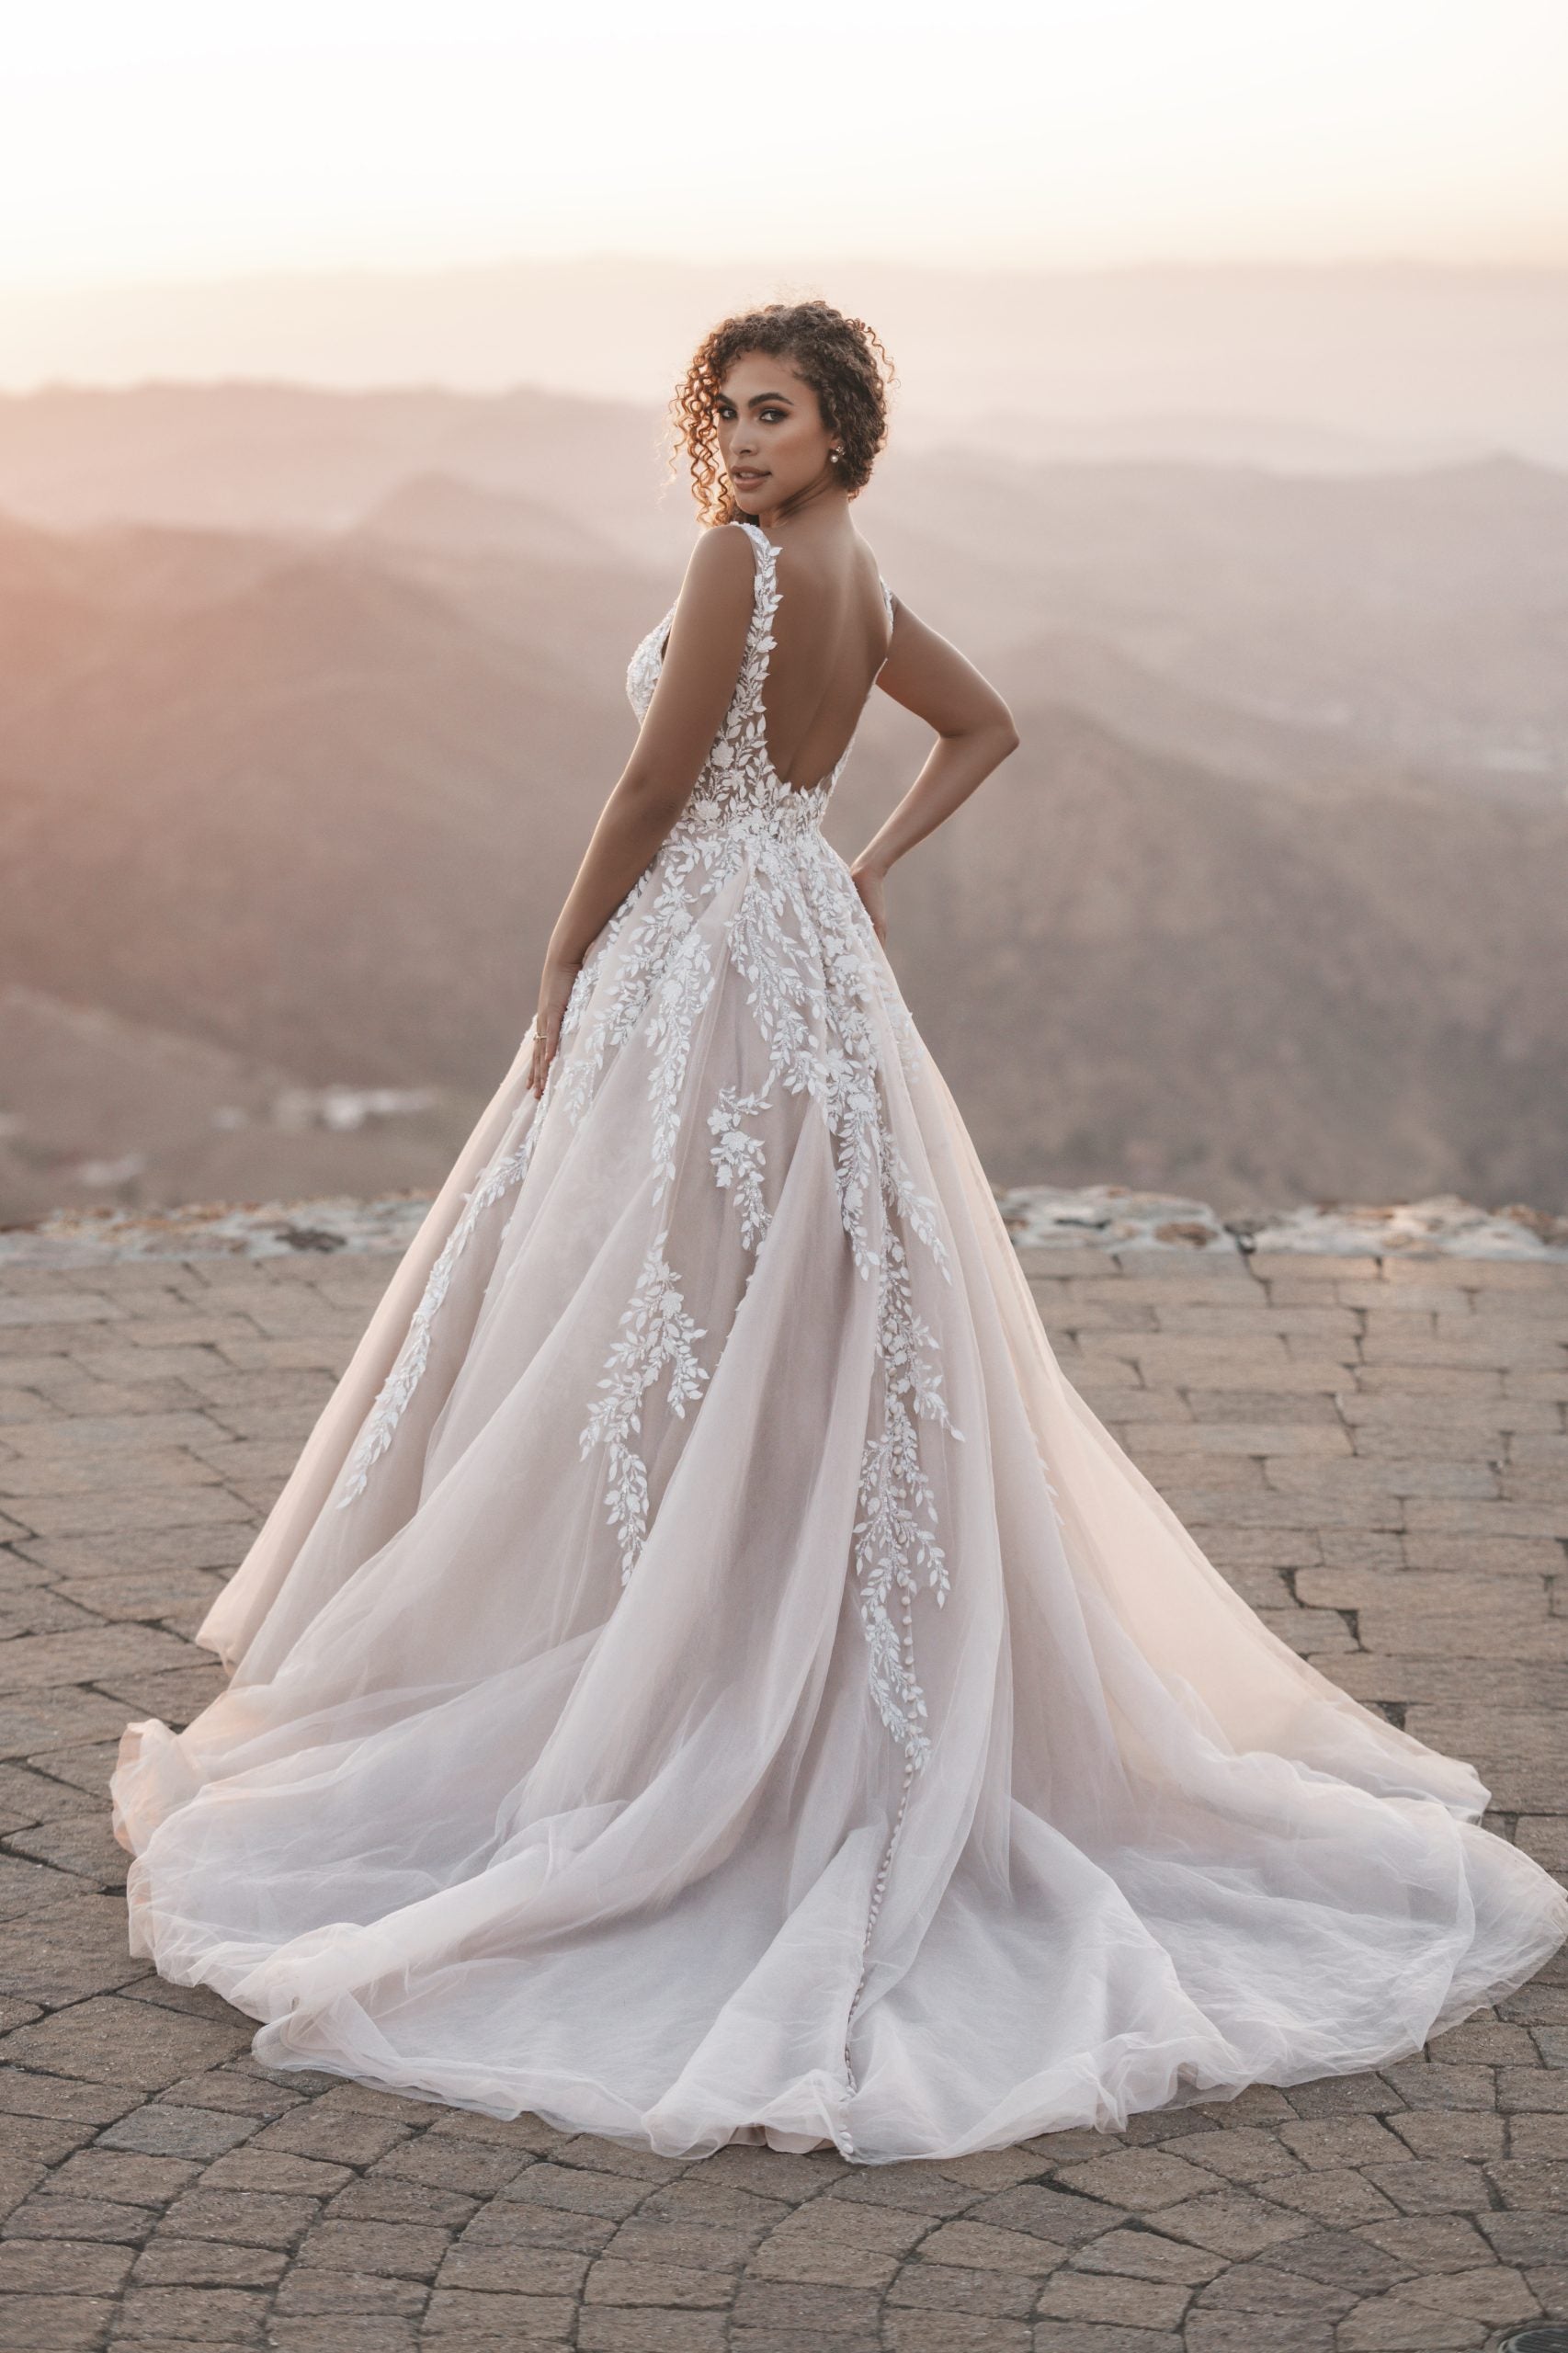 V-Neck Tulle Ball Gown With Open Back by Allure Bridals - Image 2